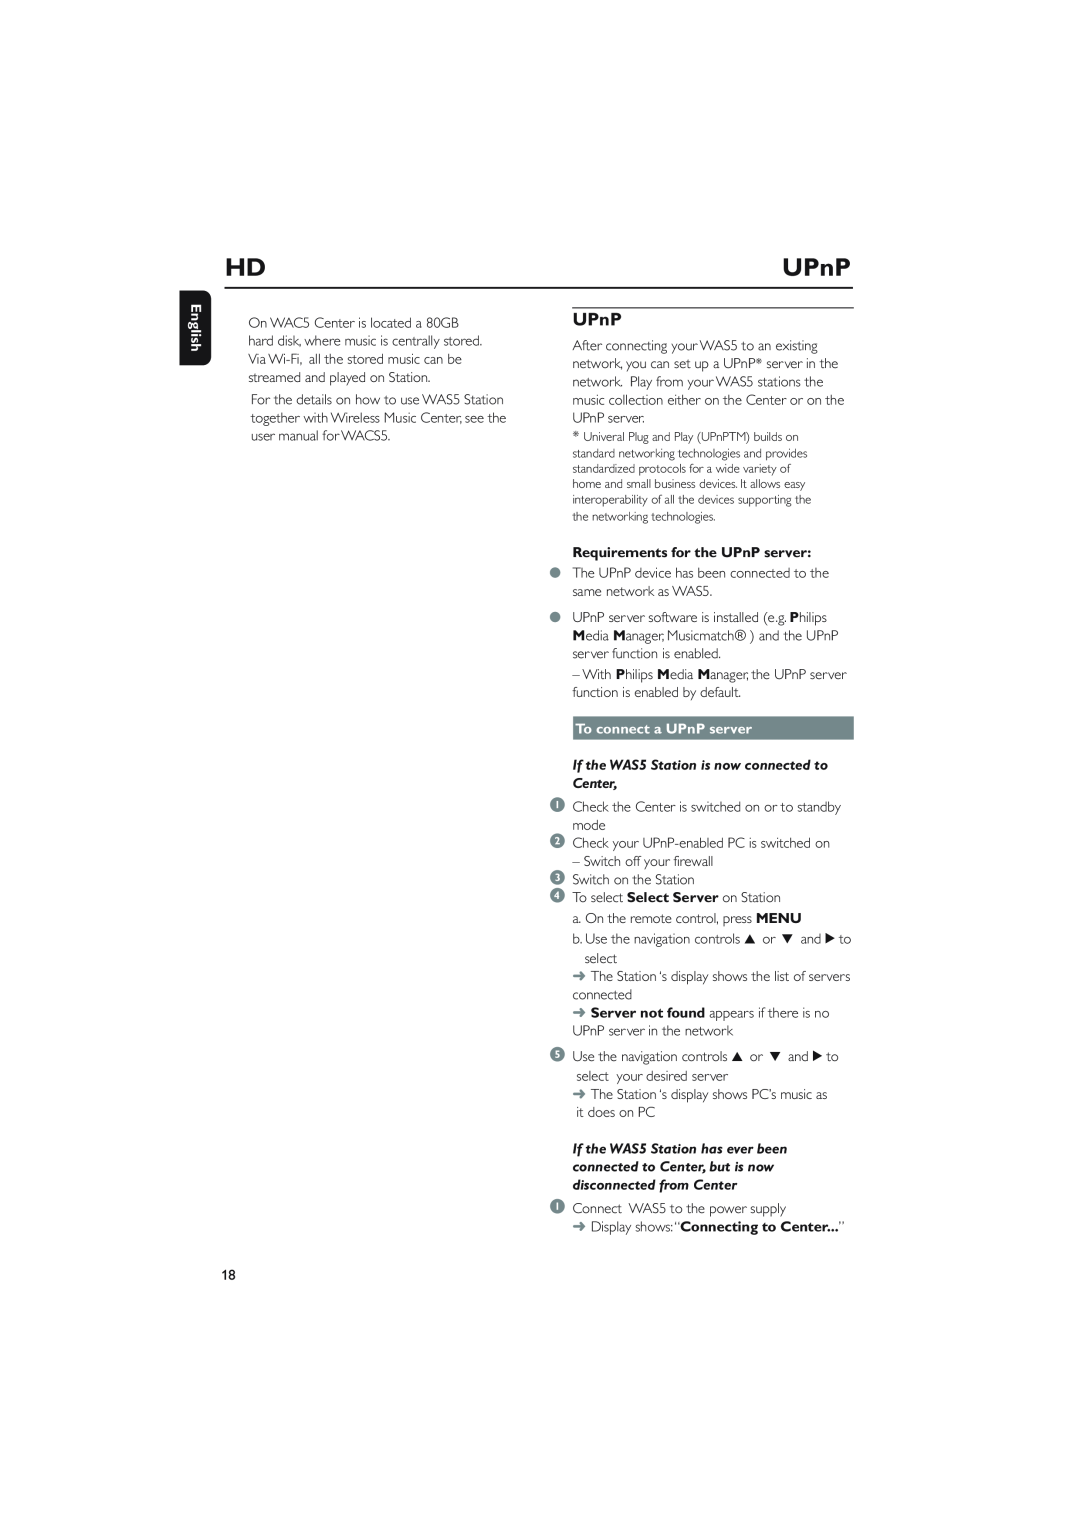 Philips WAS5 user manual English, Requirements for the UPnP server, To connect a UPnP server 